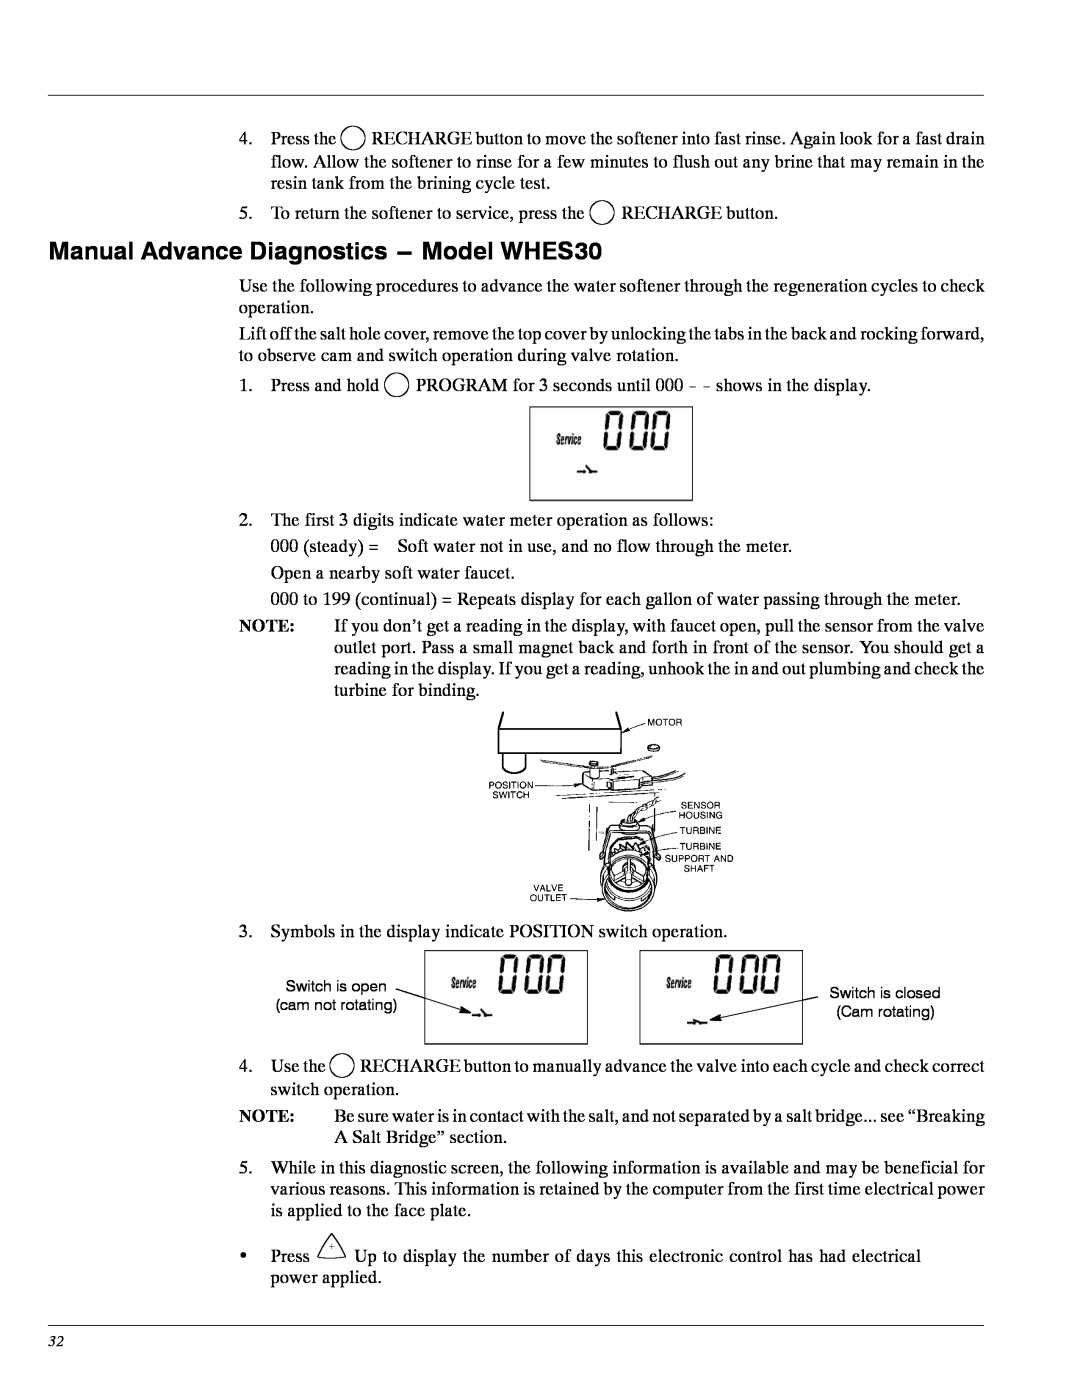 Whirlpool Manual Advance Diagnostics ---Model WHES30, Switch is open, Switch is closed, cam not rotating, Cam rotating 